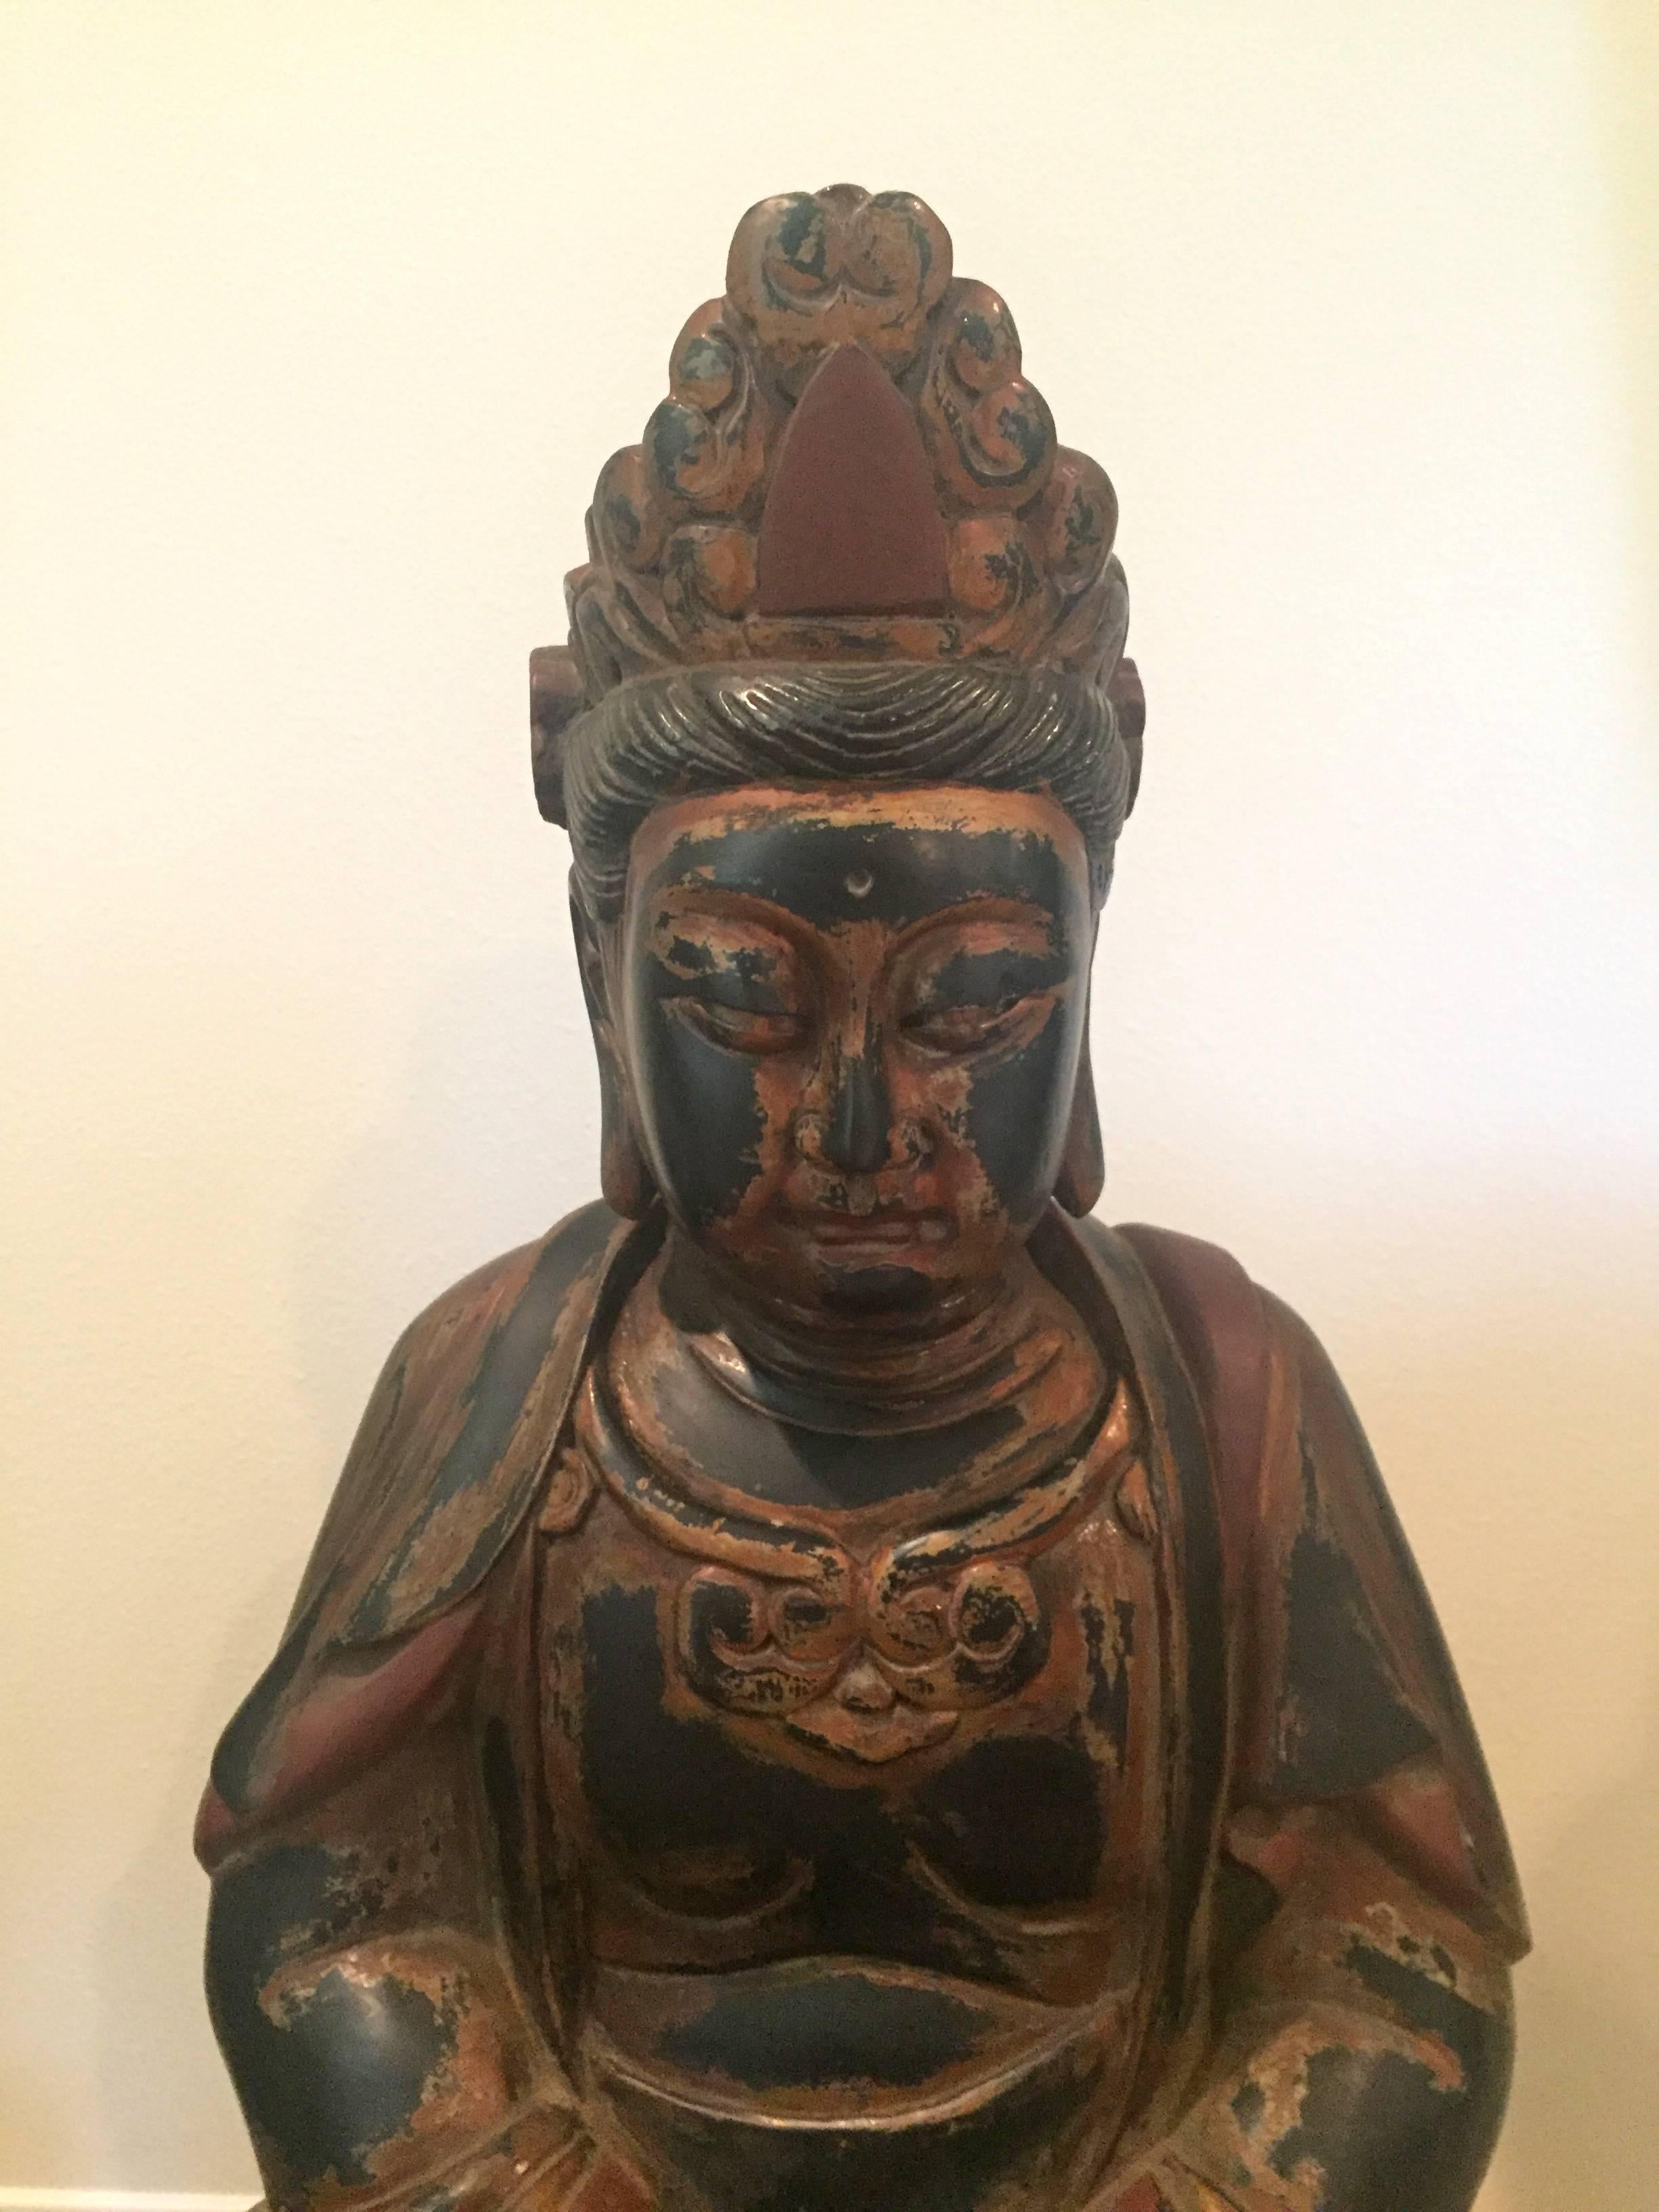 Stunning Buddha statue is made of solid wood. He is seated on a carved lotus throne, his hands in the mudra of unity. The facial expression is serene and peaceful. The style of Buddha follows the Traditional Design of the Tang dynasty, with a full